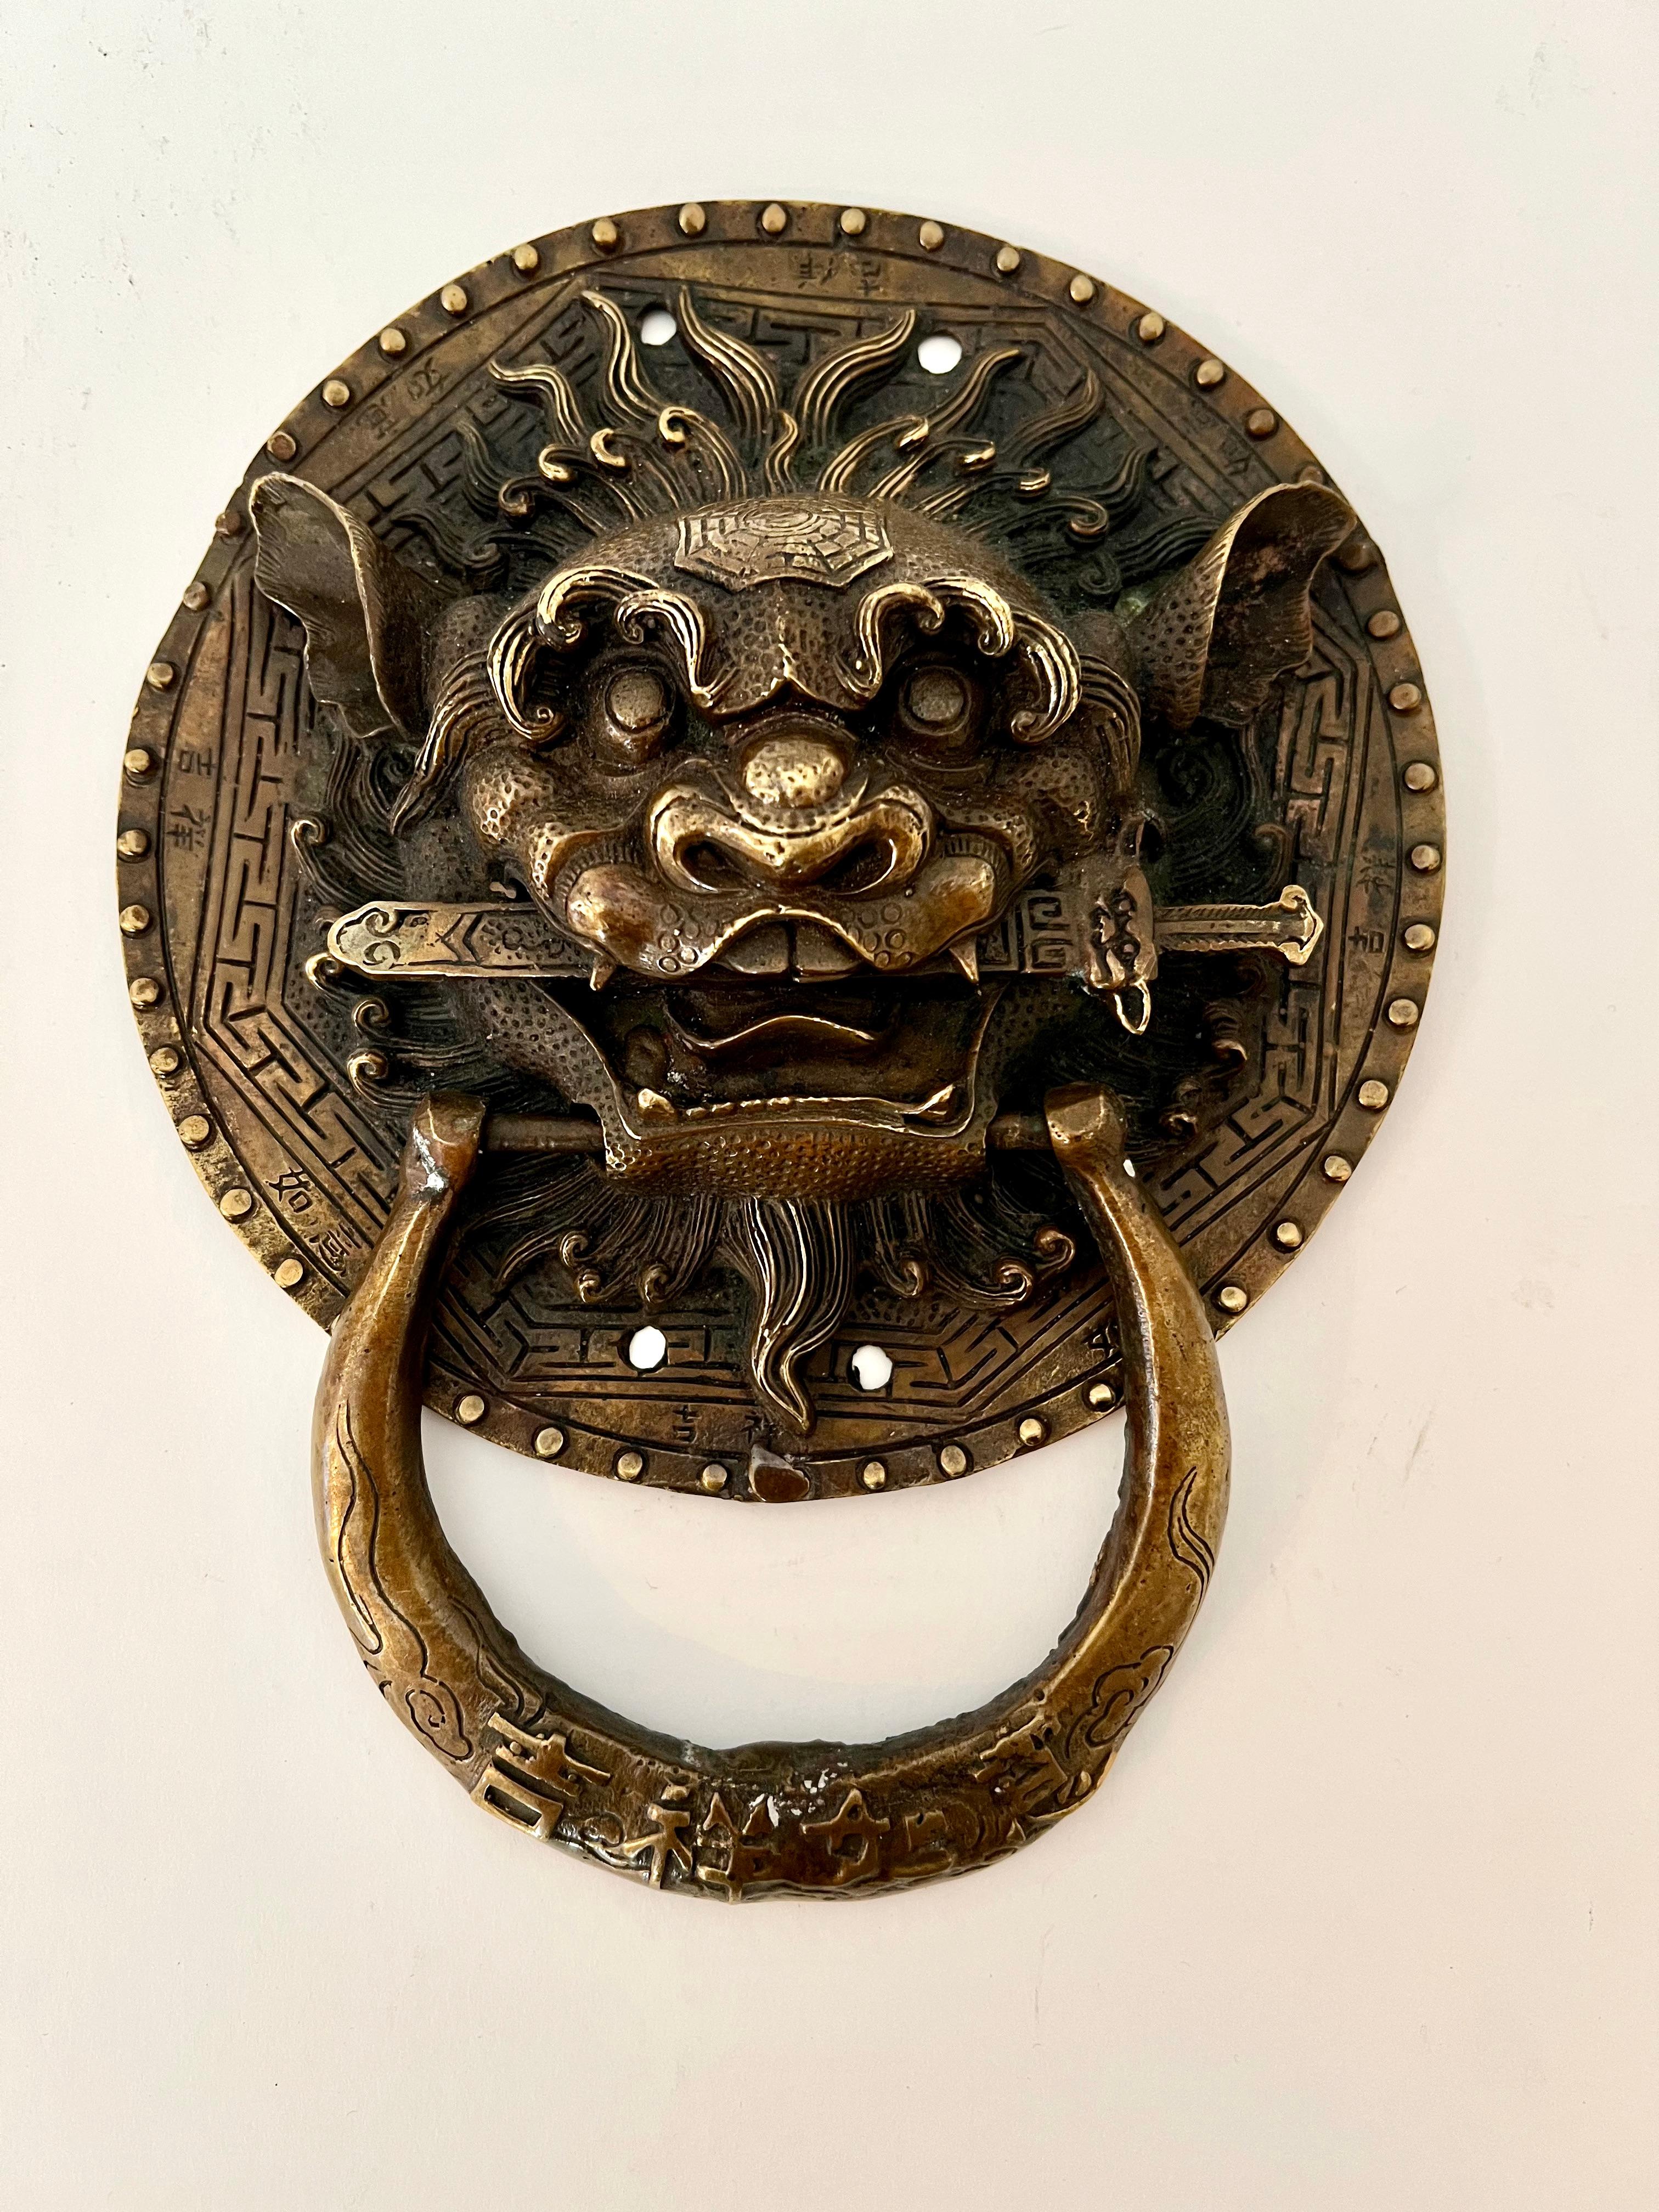 A large and unique bronze foo dog door knocker - the size and scale are impressive and eye catching. For the home that has an Asia influence. The patination of the bronze is very deep and important. A compliment o many entrances and also could be a